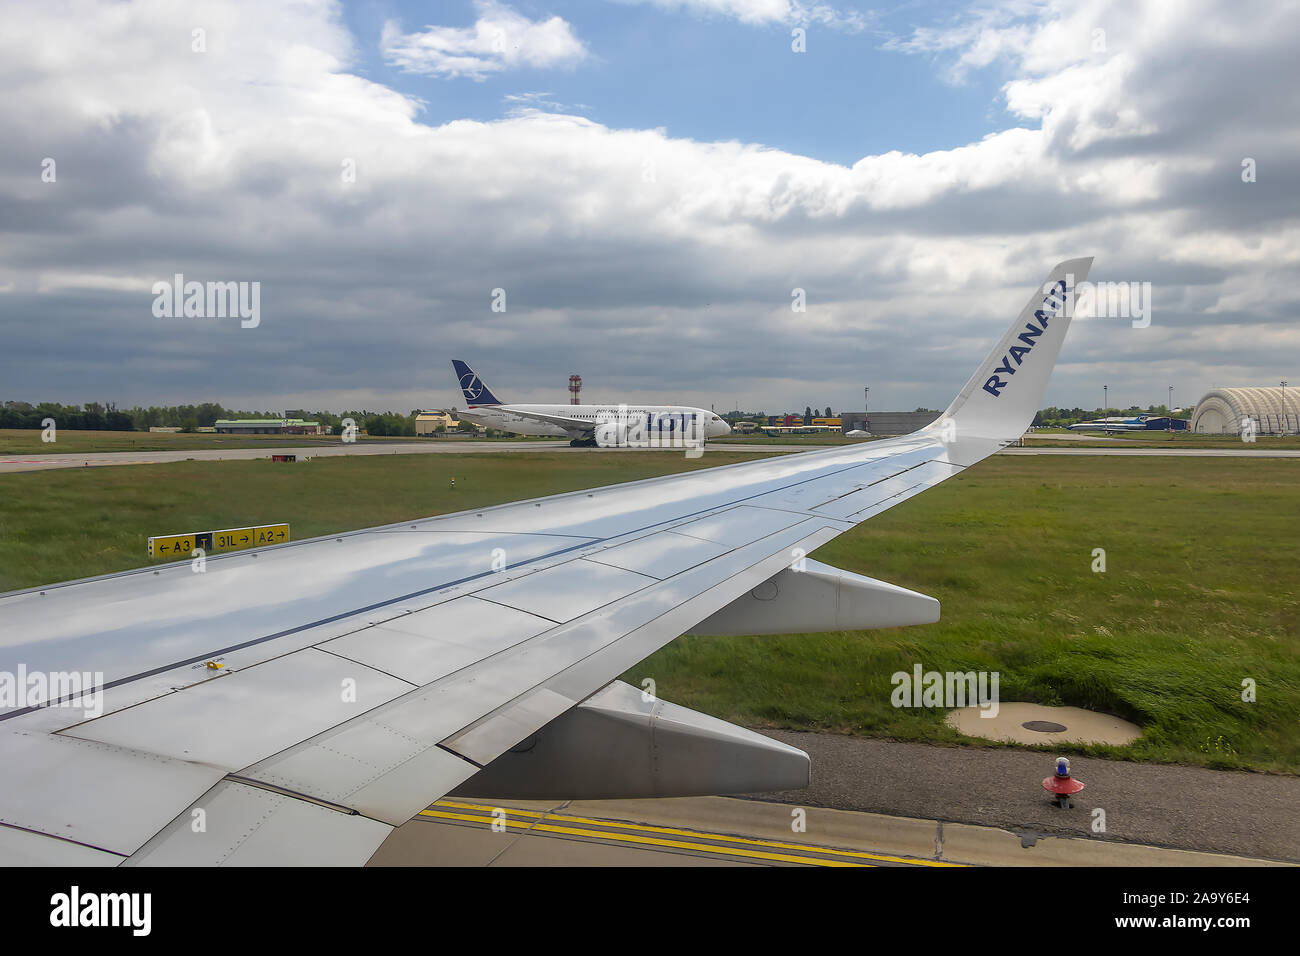 Budapest, Hungary - May 23, 2019 : View from passenger seat of a Ryanair plane landing at Budapest airport Stock Photo